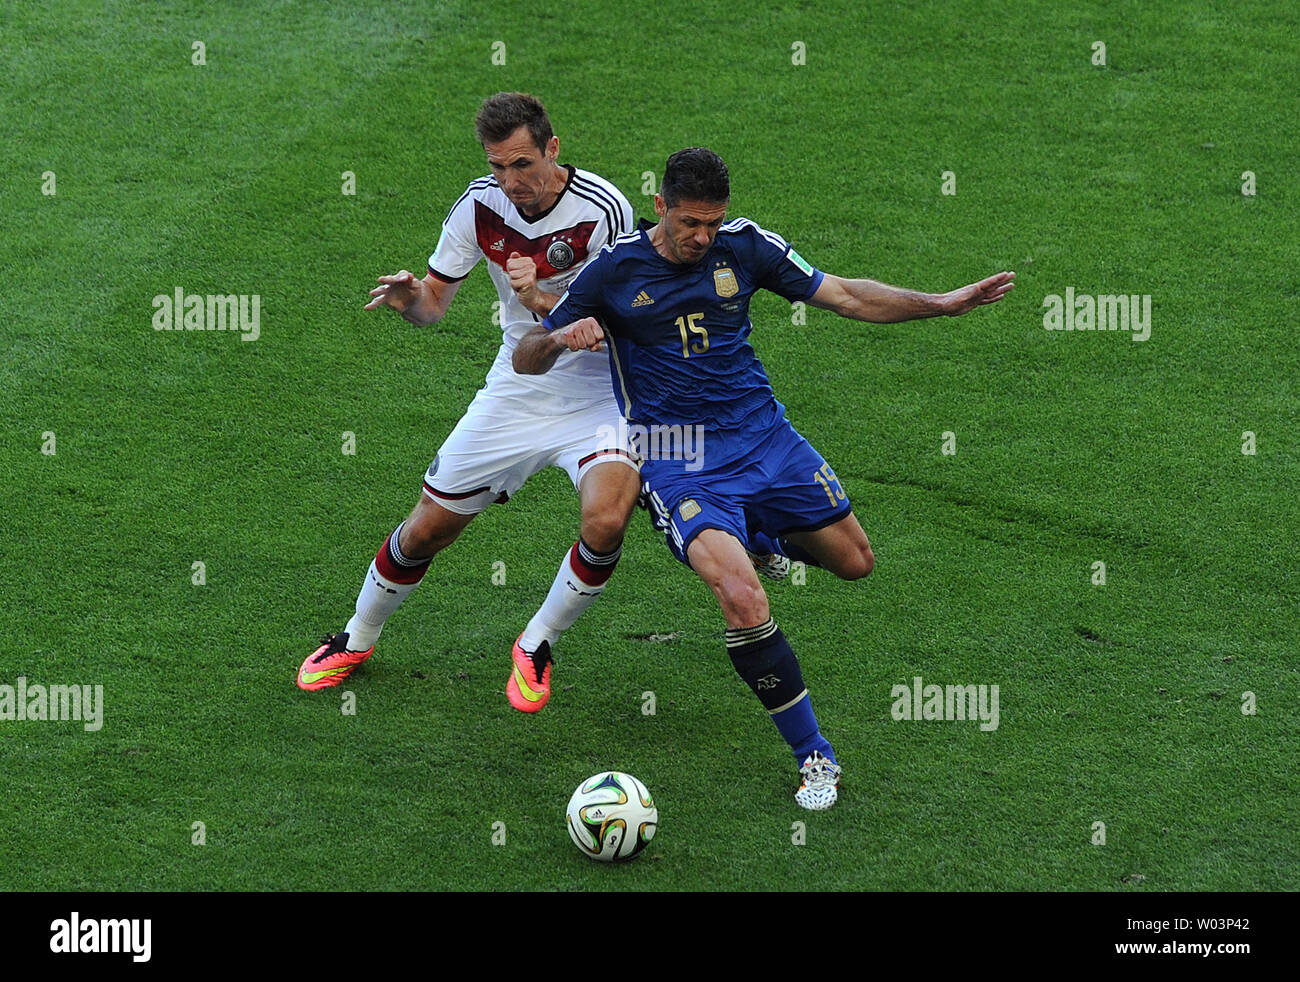 Miroslav Klose (L) of Germany competes with Martin Demichelis of Argentina during the 2014 FIFA World Cup Final at the Estadio do Maracana in Rio de Janeiro, Brazil on July 13, 2014. UPI/Chris Brunskill Stock Photo